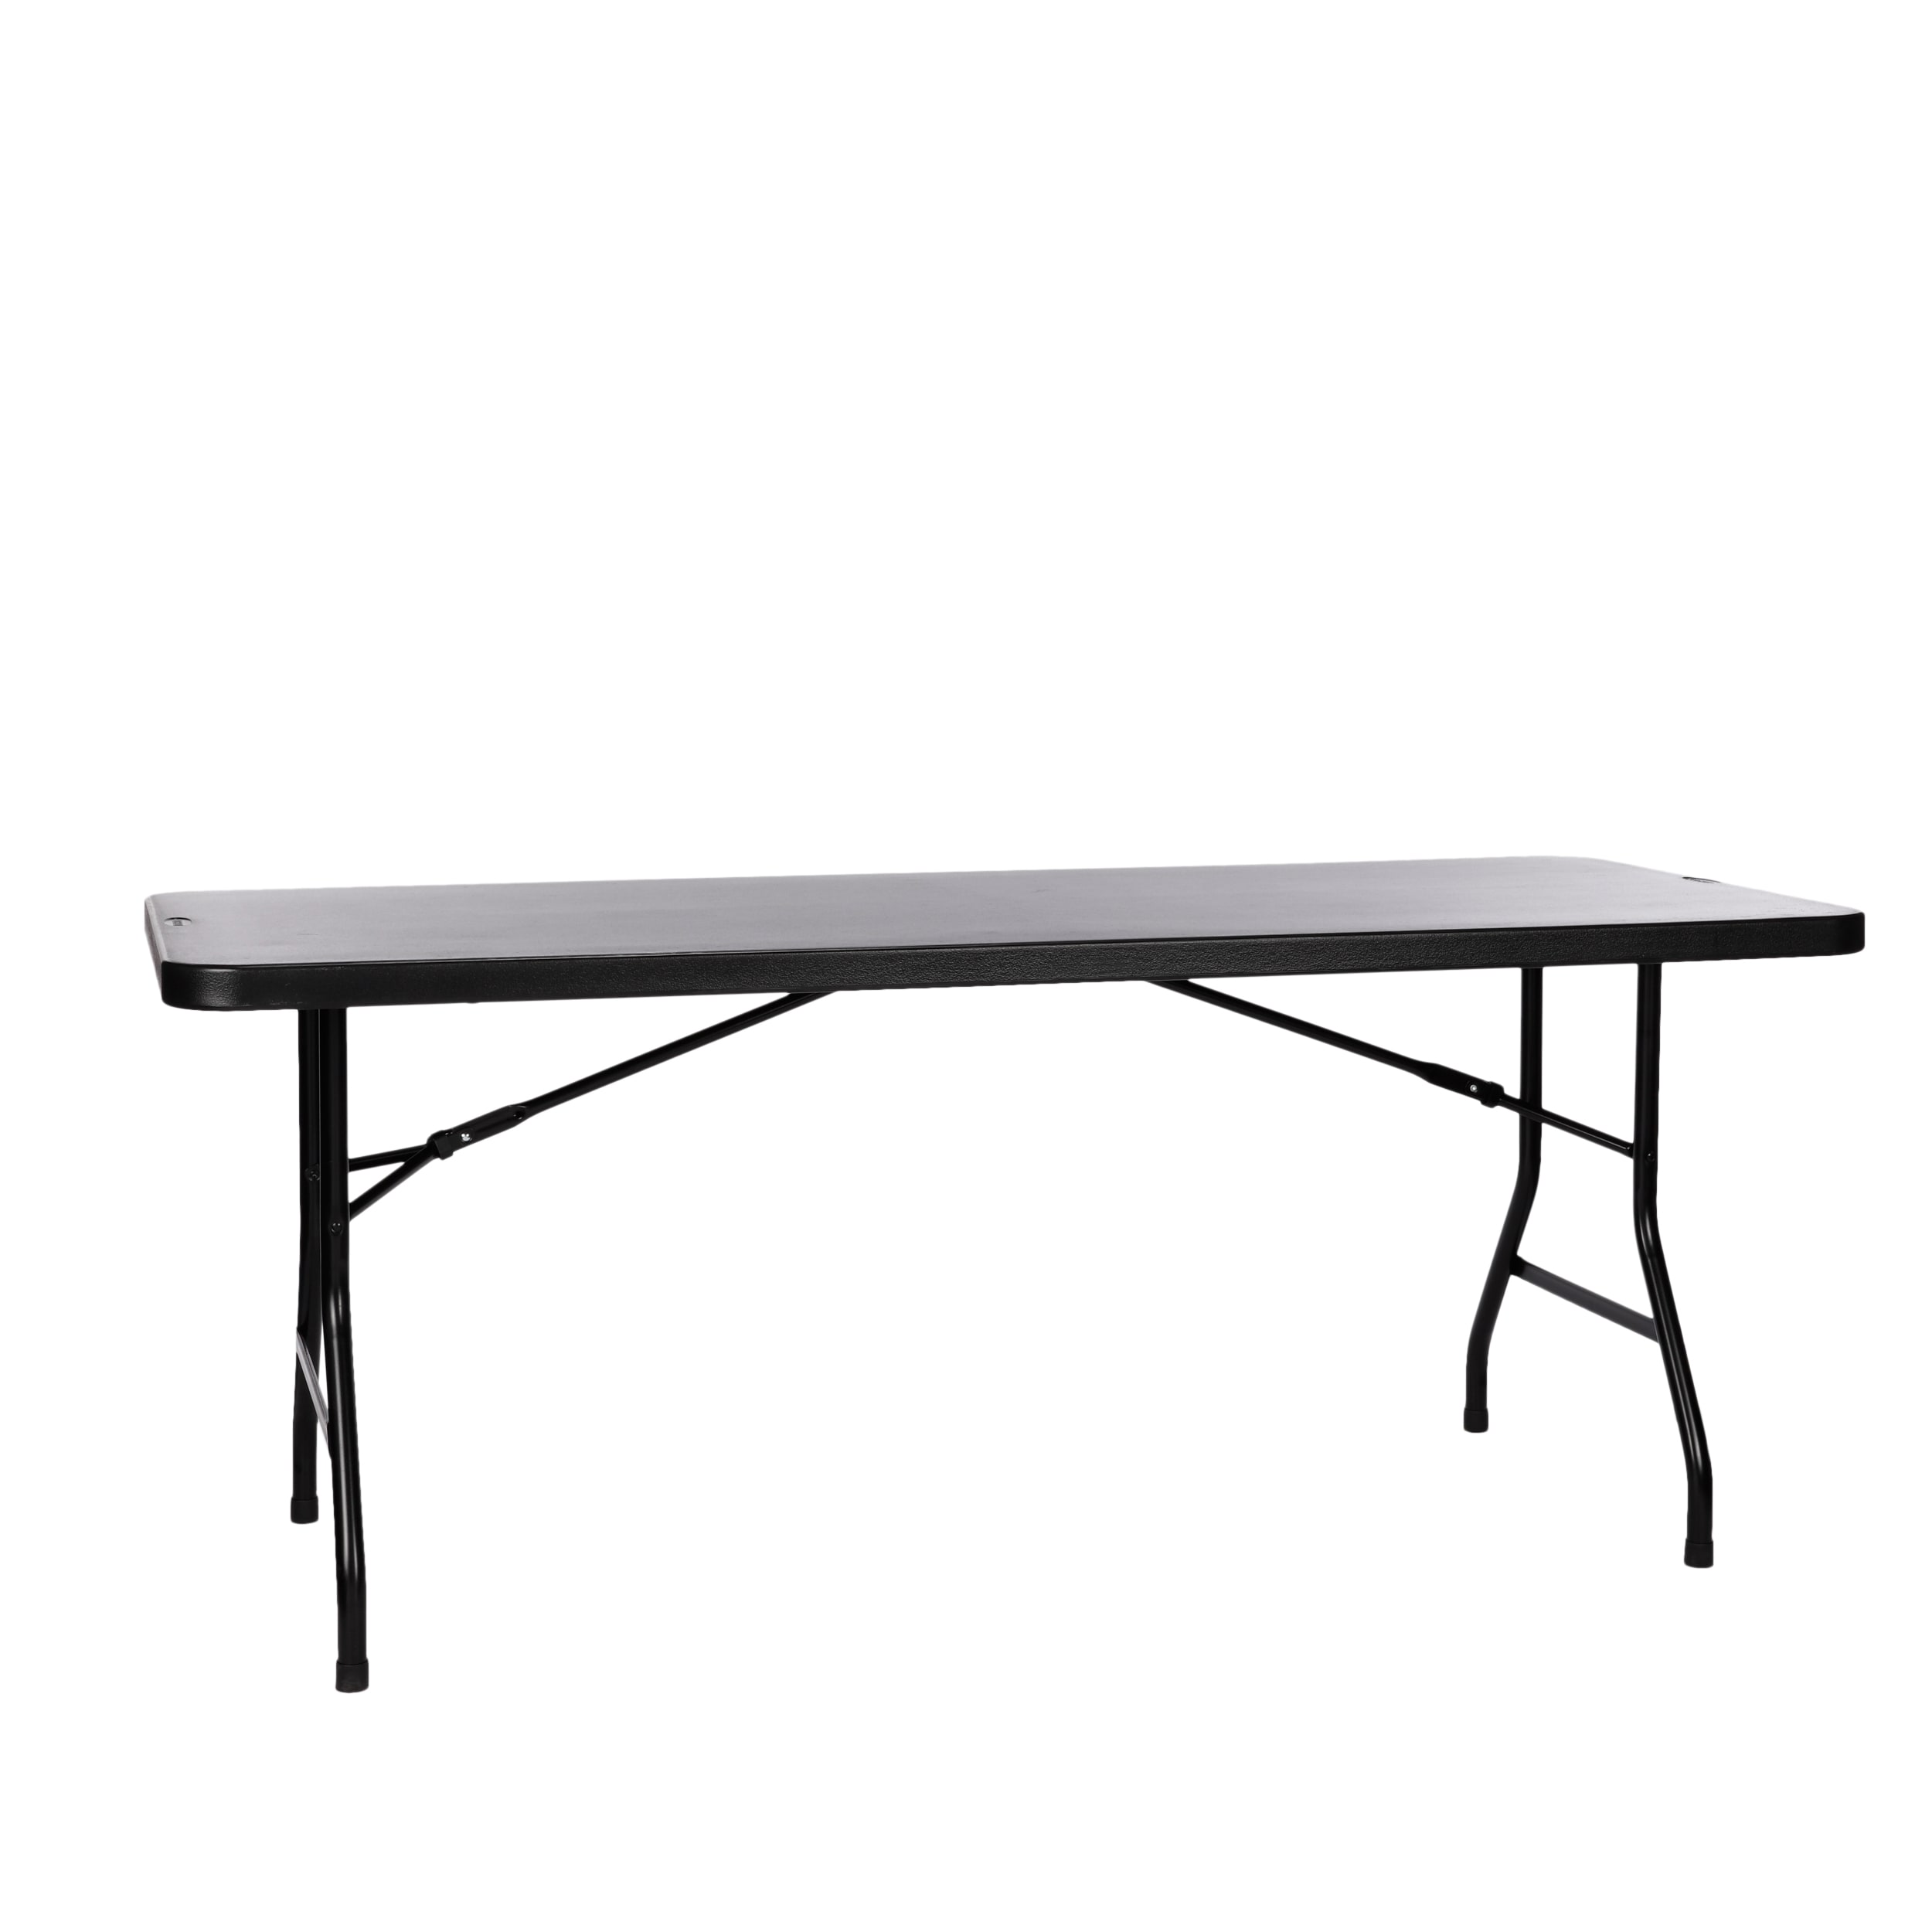 Folding Legs Garden Super Strong Buff 3ft Blow Moulded Trestle Table Market Stall 